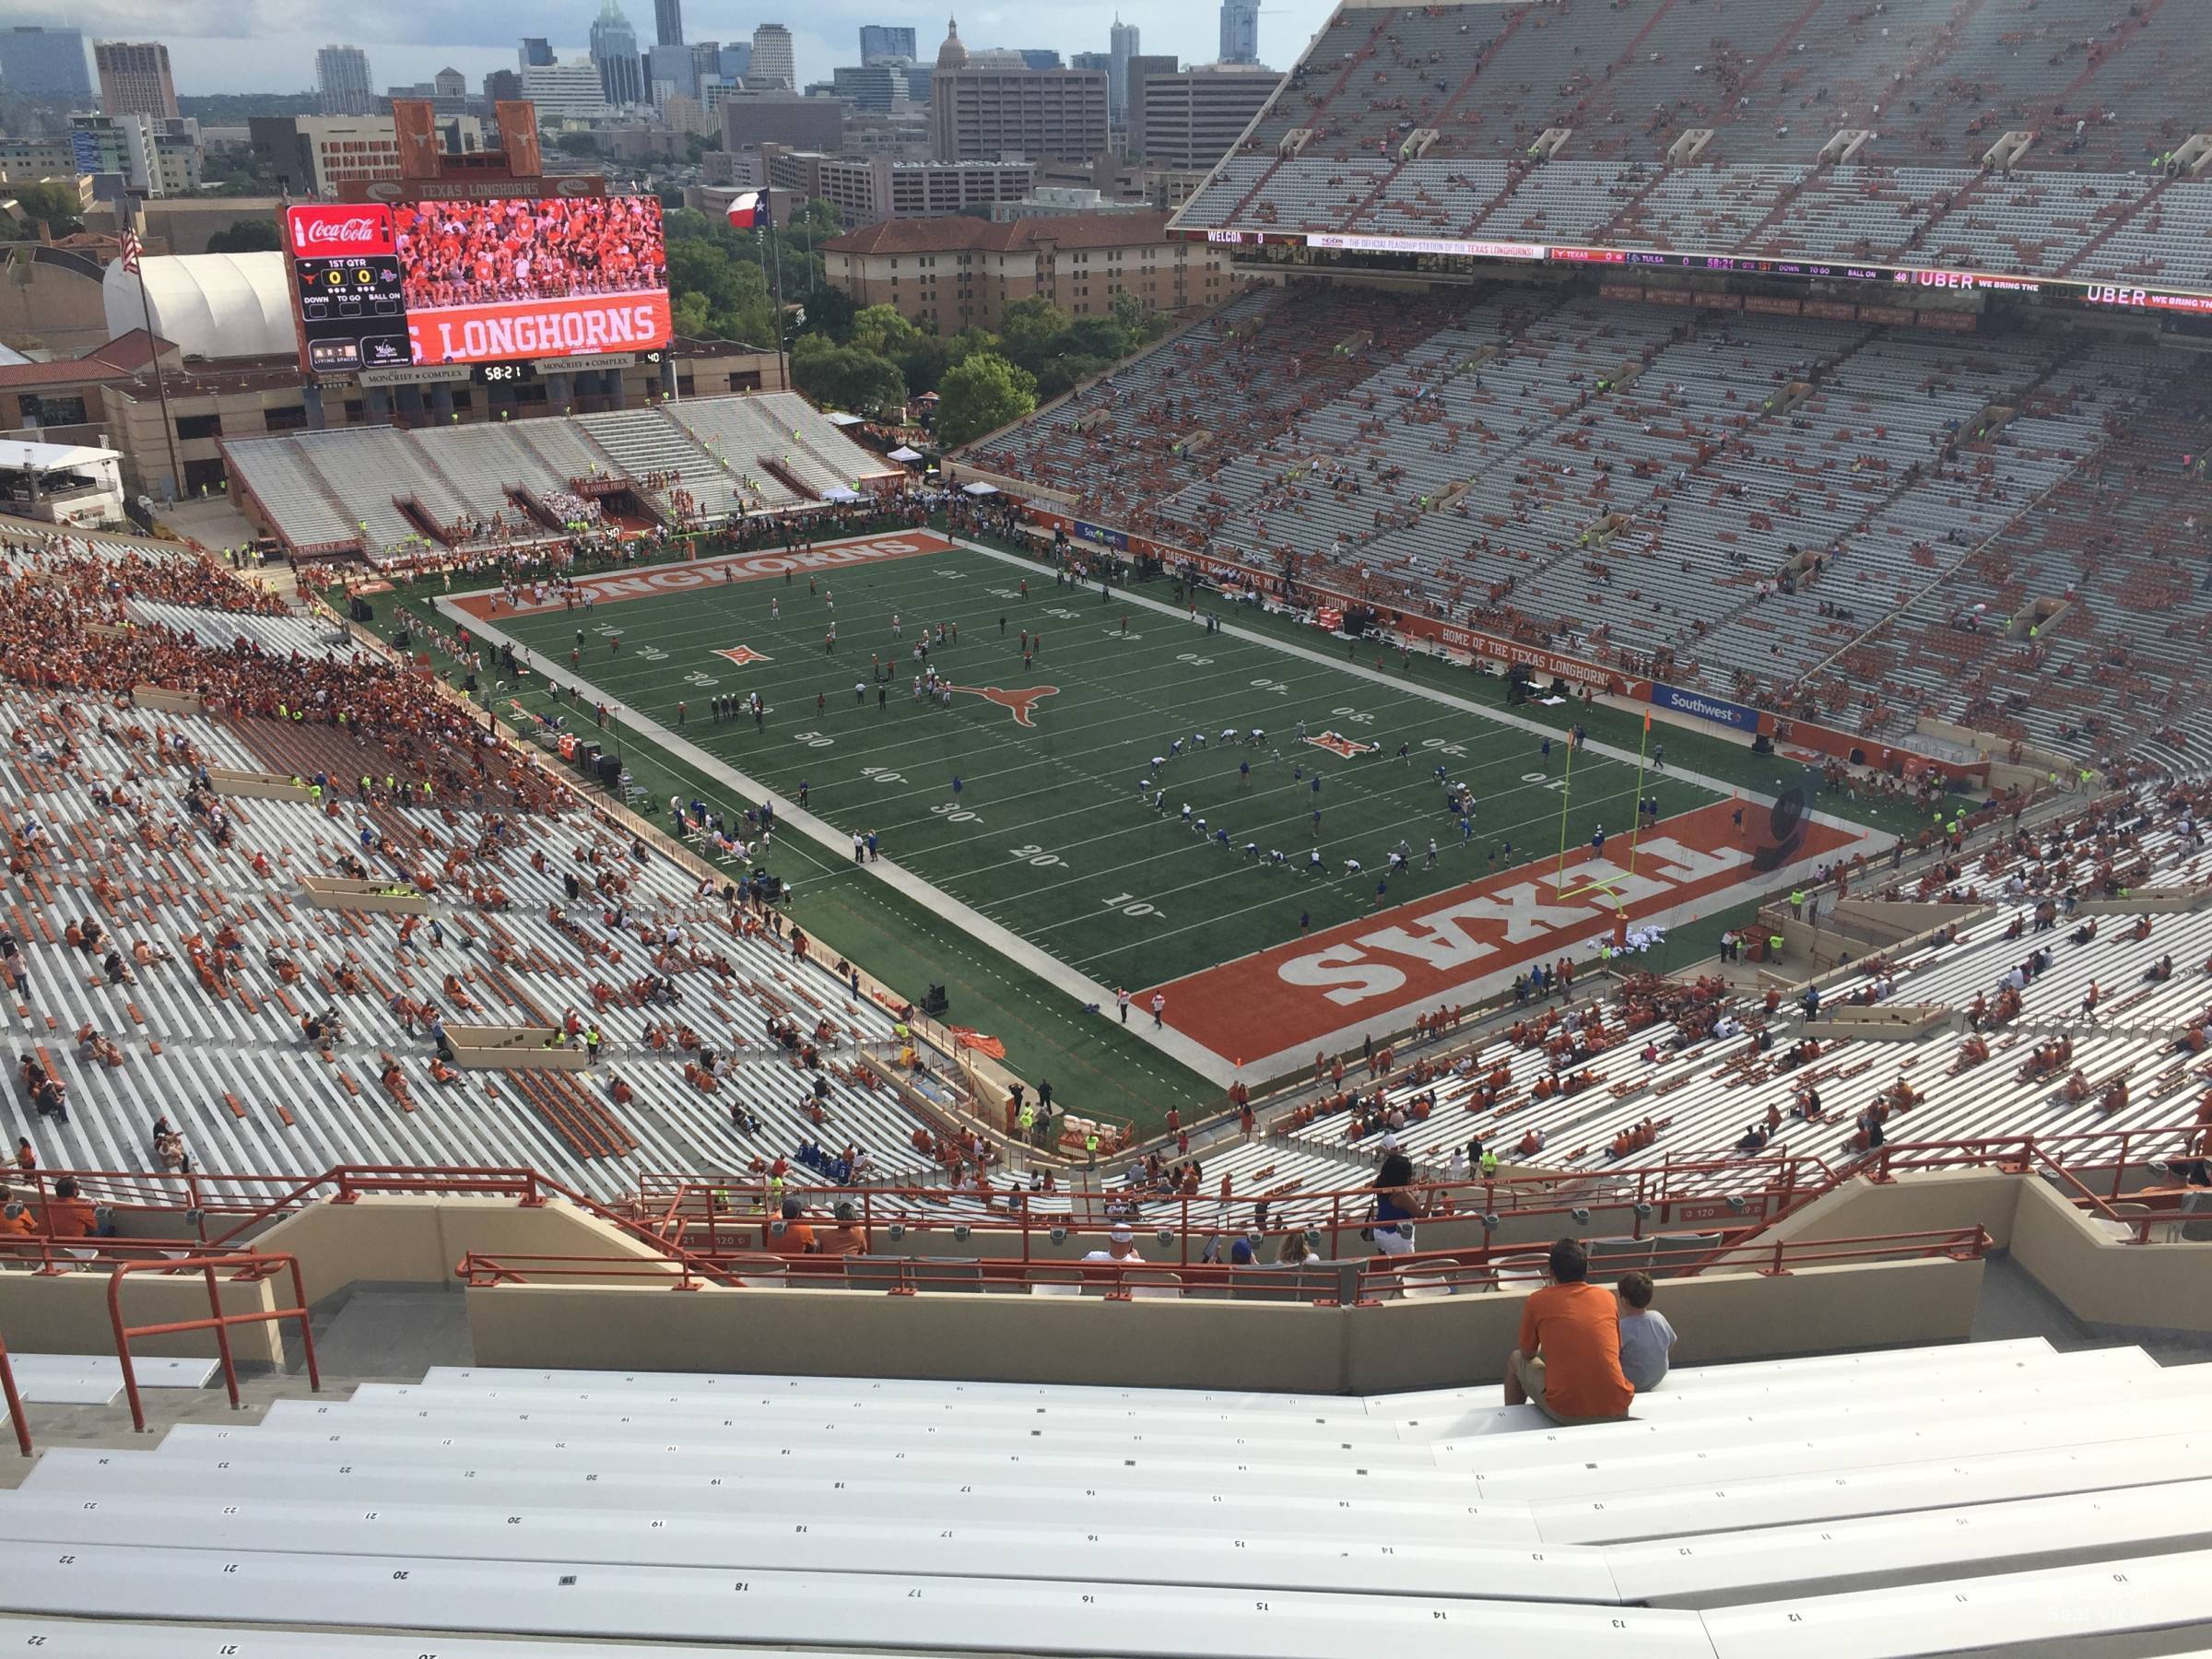 section 120, row 20 seat view  - dkr-texas memorial stadium